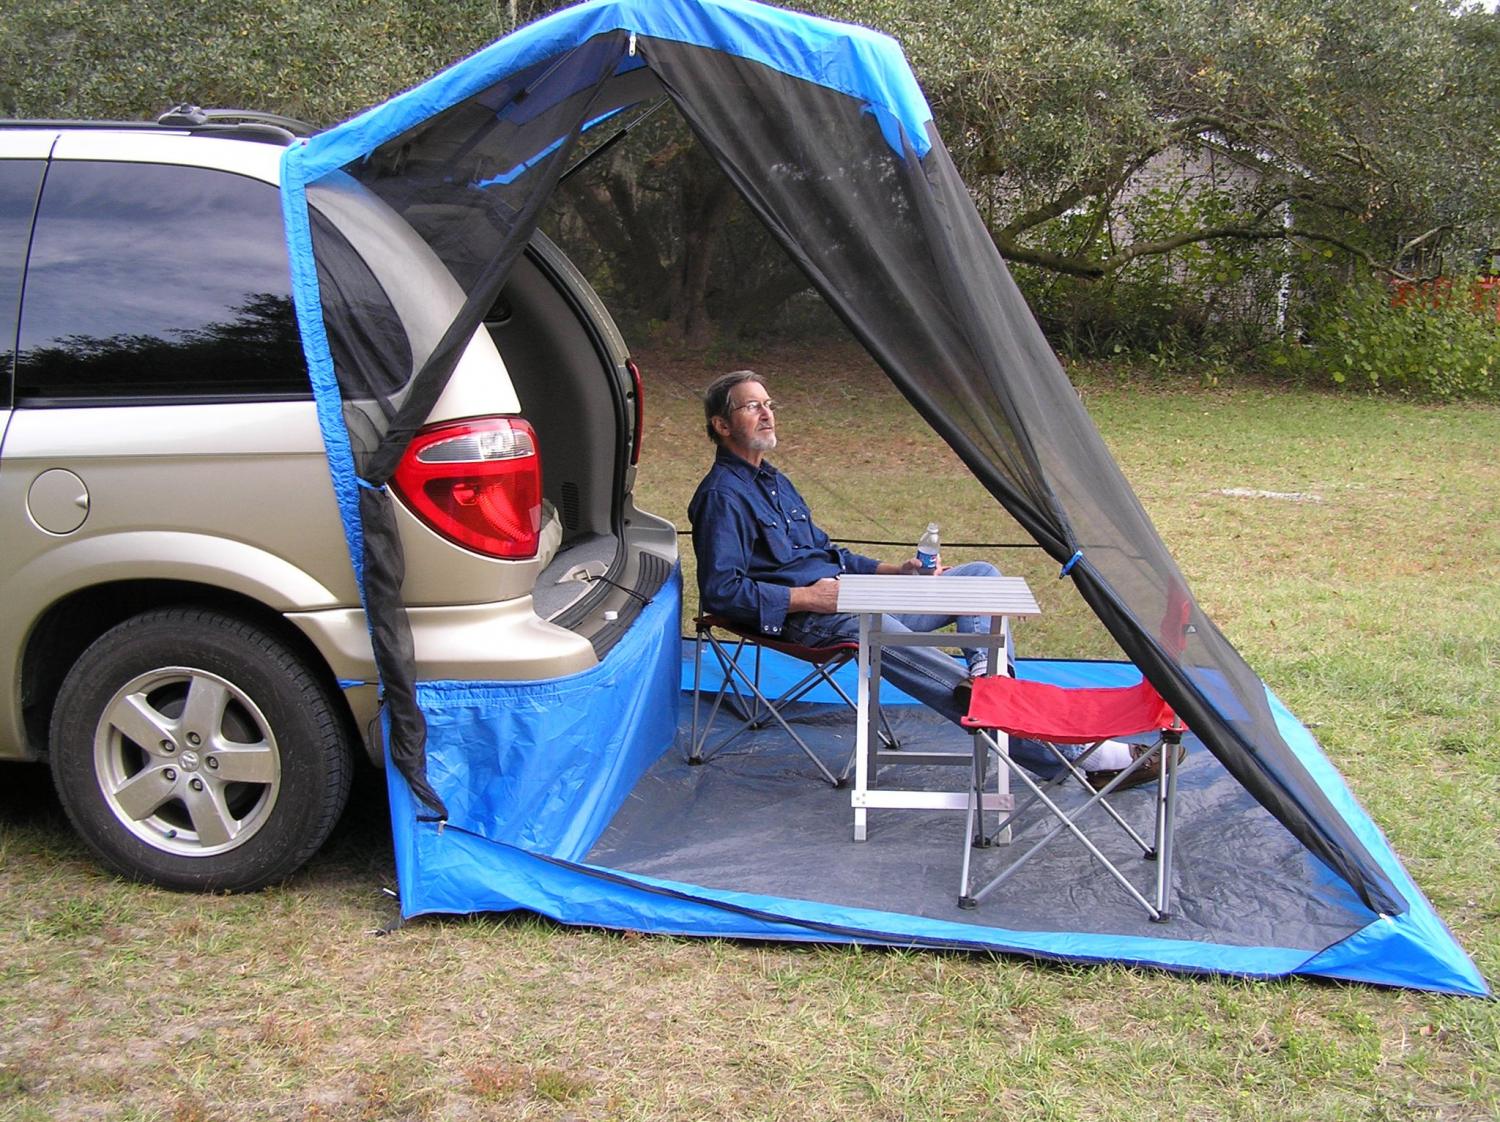 TailVeil Tent Attaches To Back of Your SUV or Minivan - SUV lift-gate camping tent